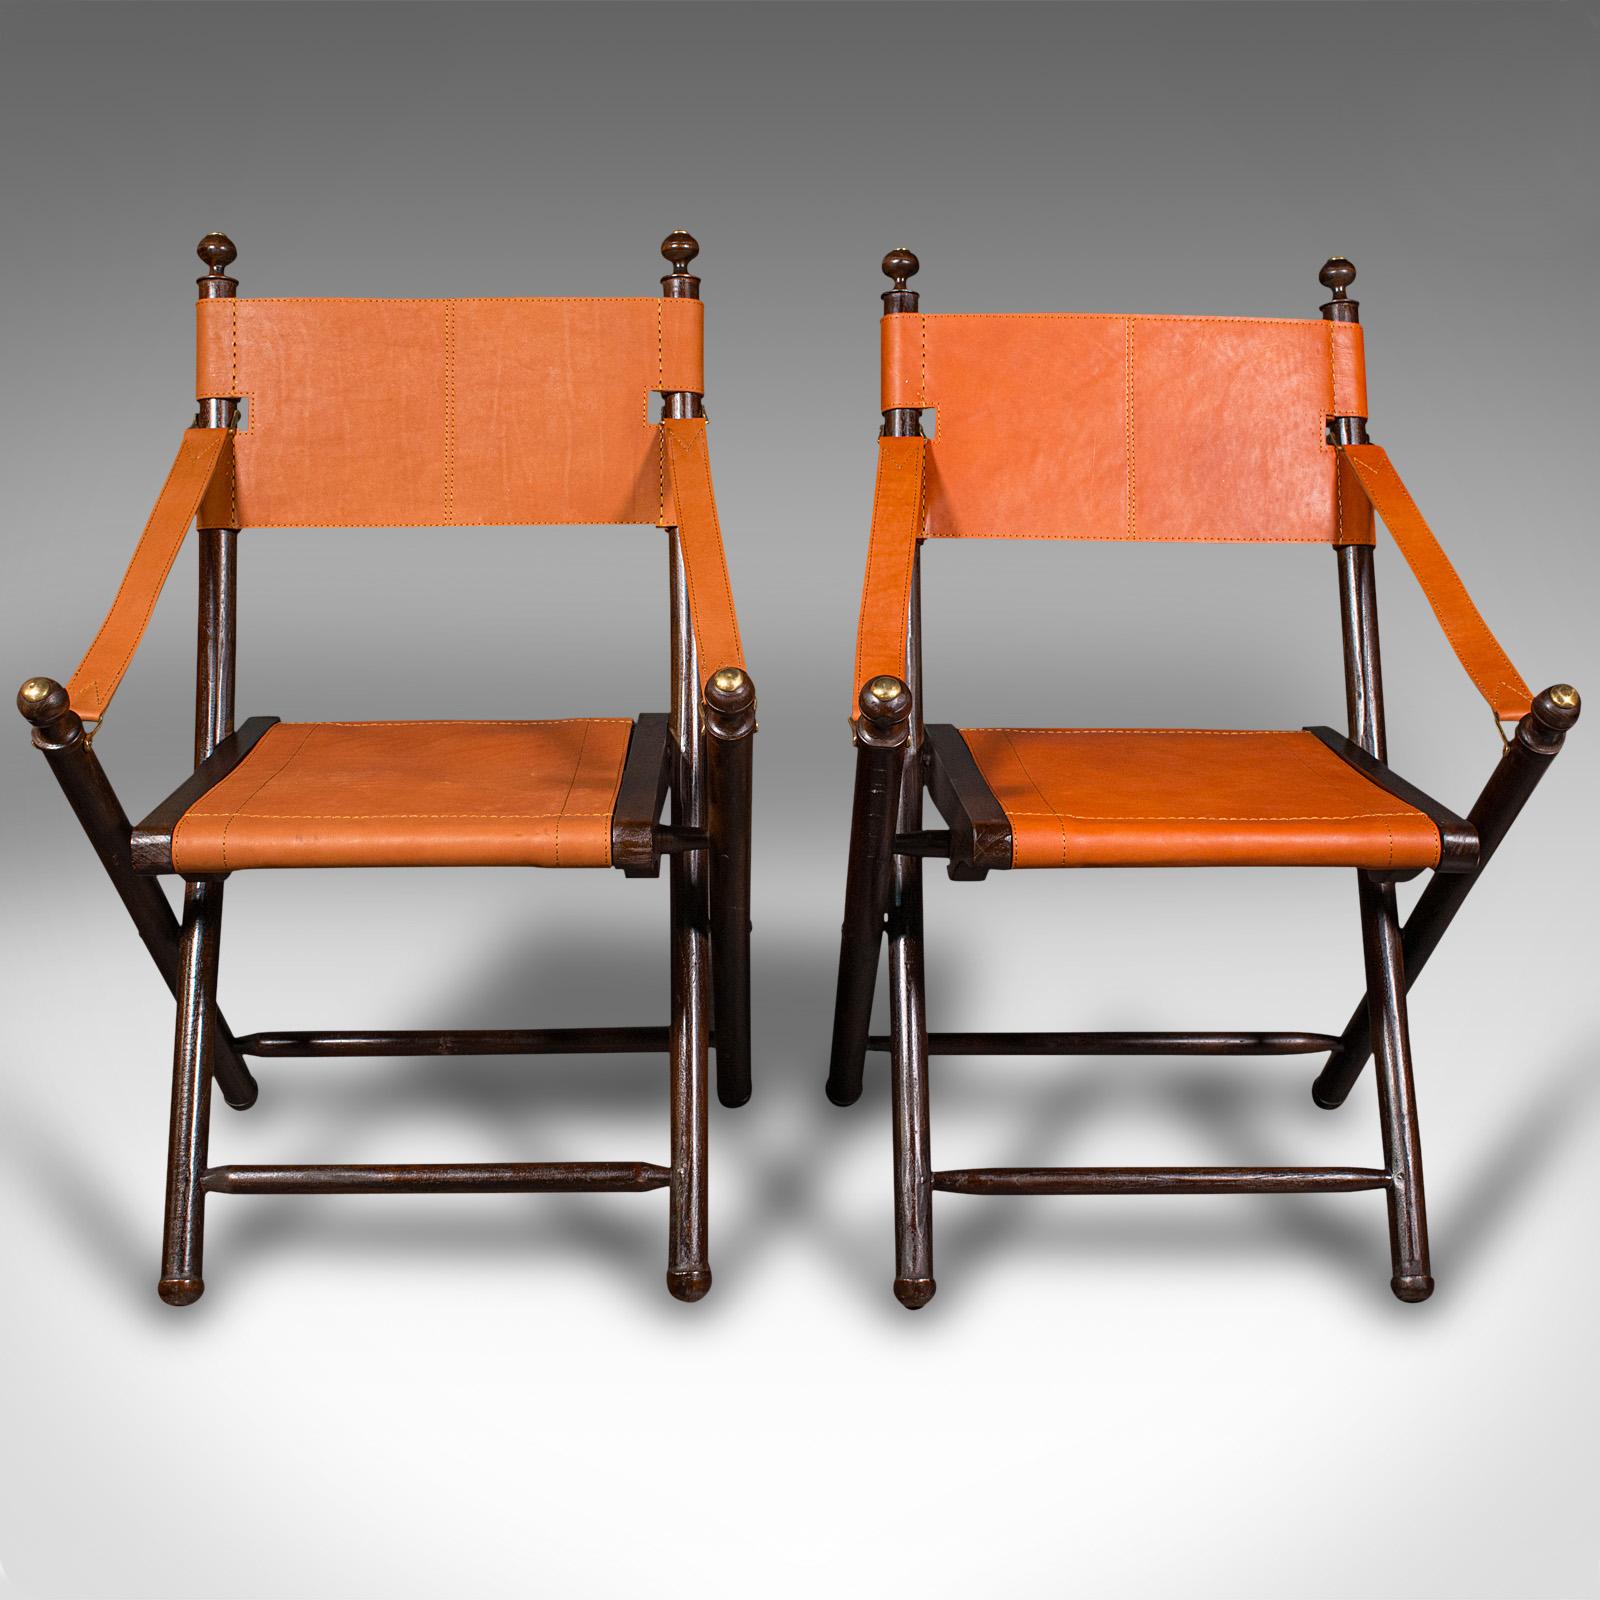 
This is a pair of contemporary veranda chairs. An English, colonial style pine and leather folding orangery or garden seat.

Highly distinctive chairs in folding director style
Presented in very good order throughout
Deep chestnut hues to the